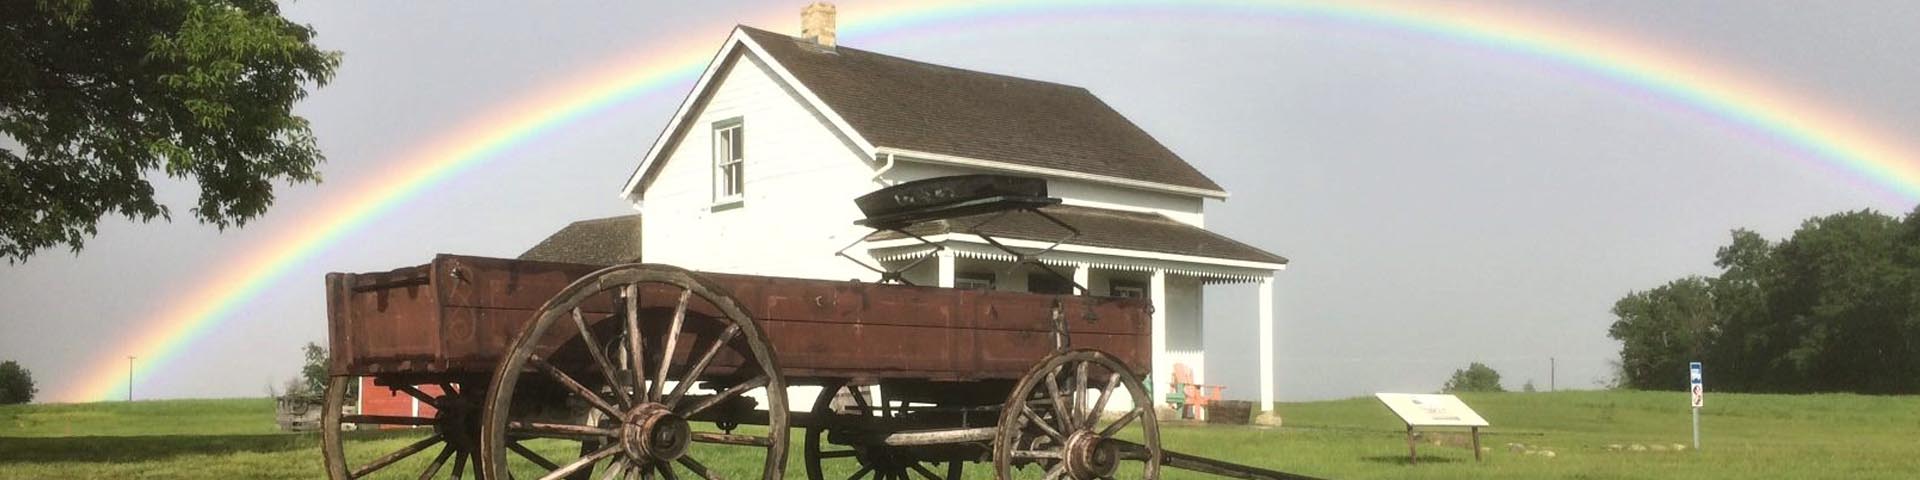 Wagon in front of the Caron Home